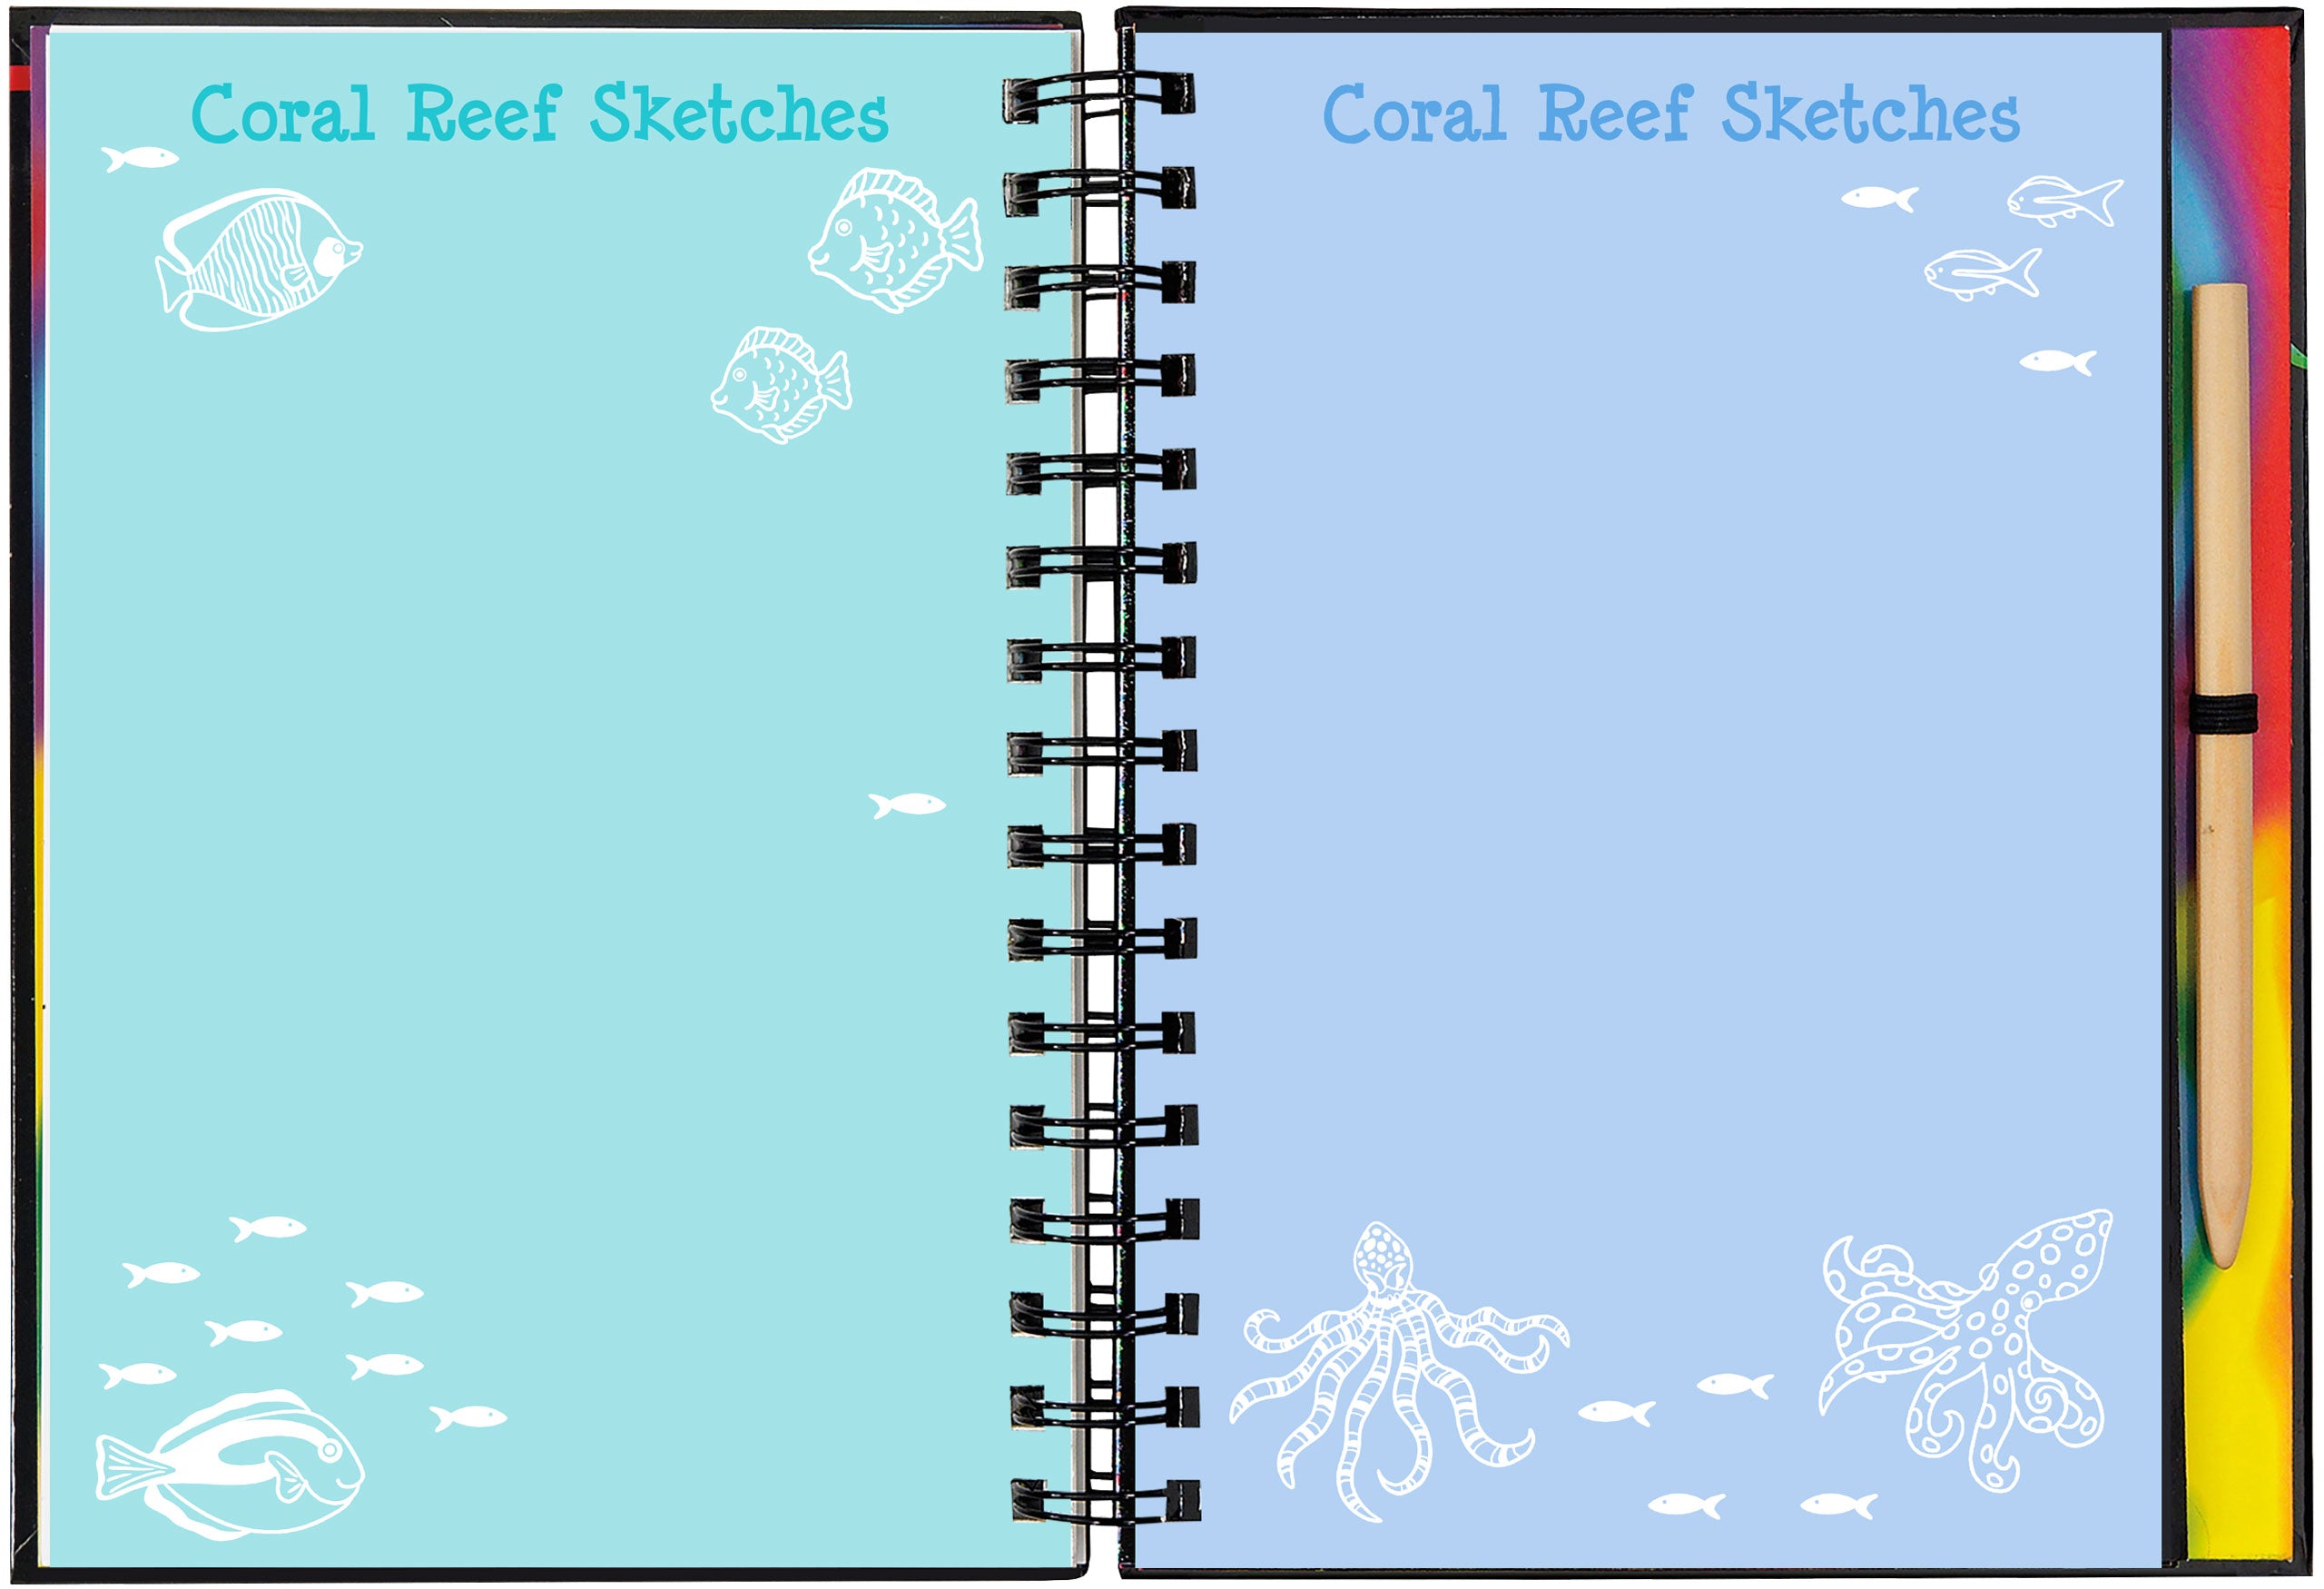 Scratch and Sketch | Coral Reefs Kaboodles Toy Store - Victoria